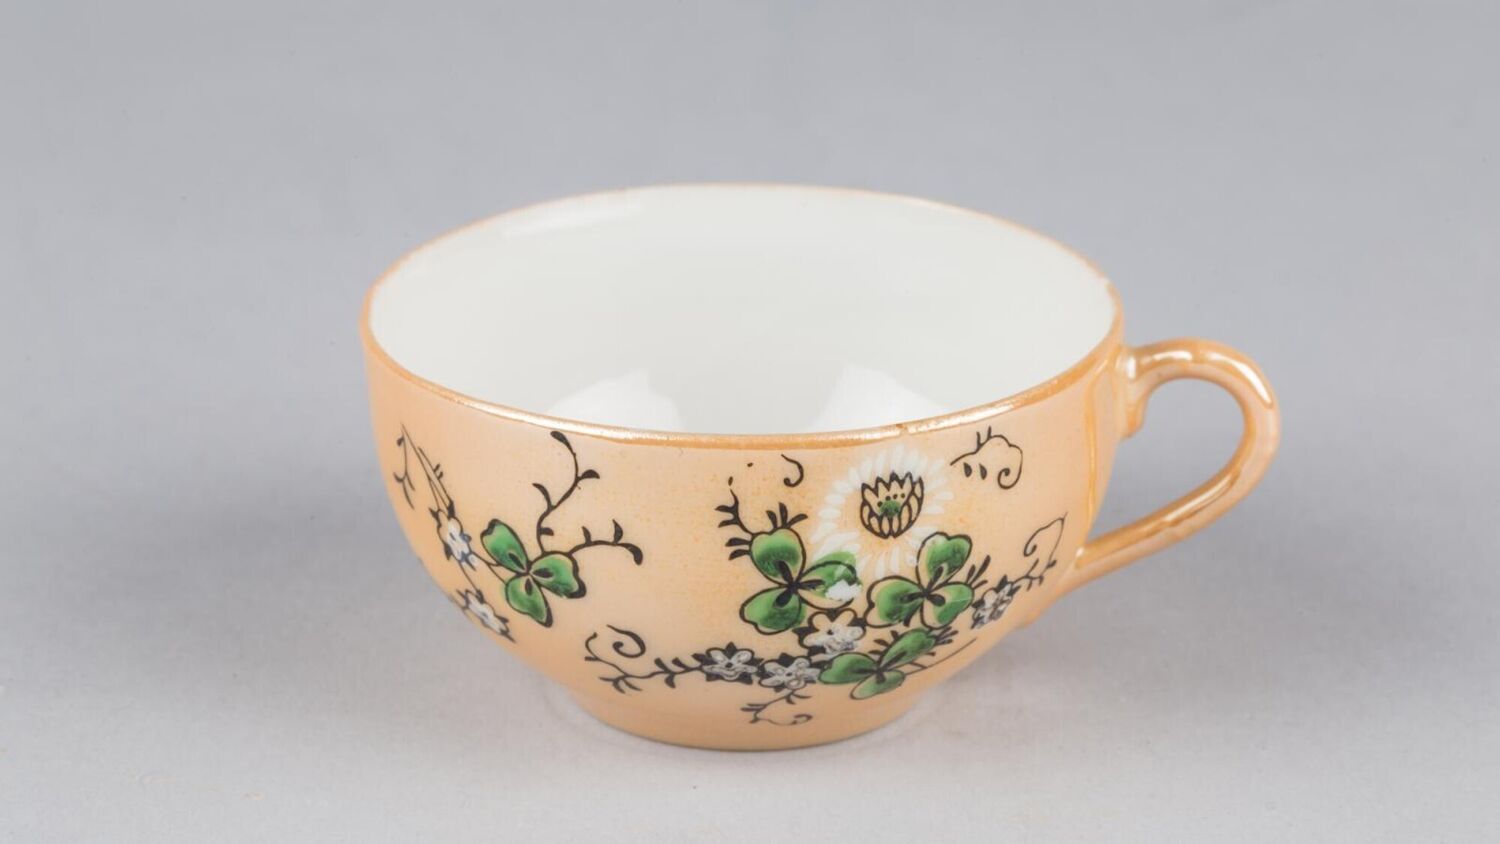 An intricately patterned child's teacup in a peach colour with a clover pattern.